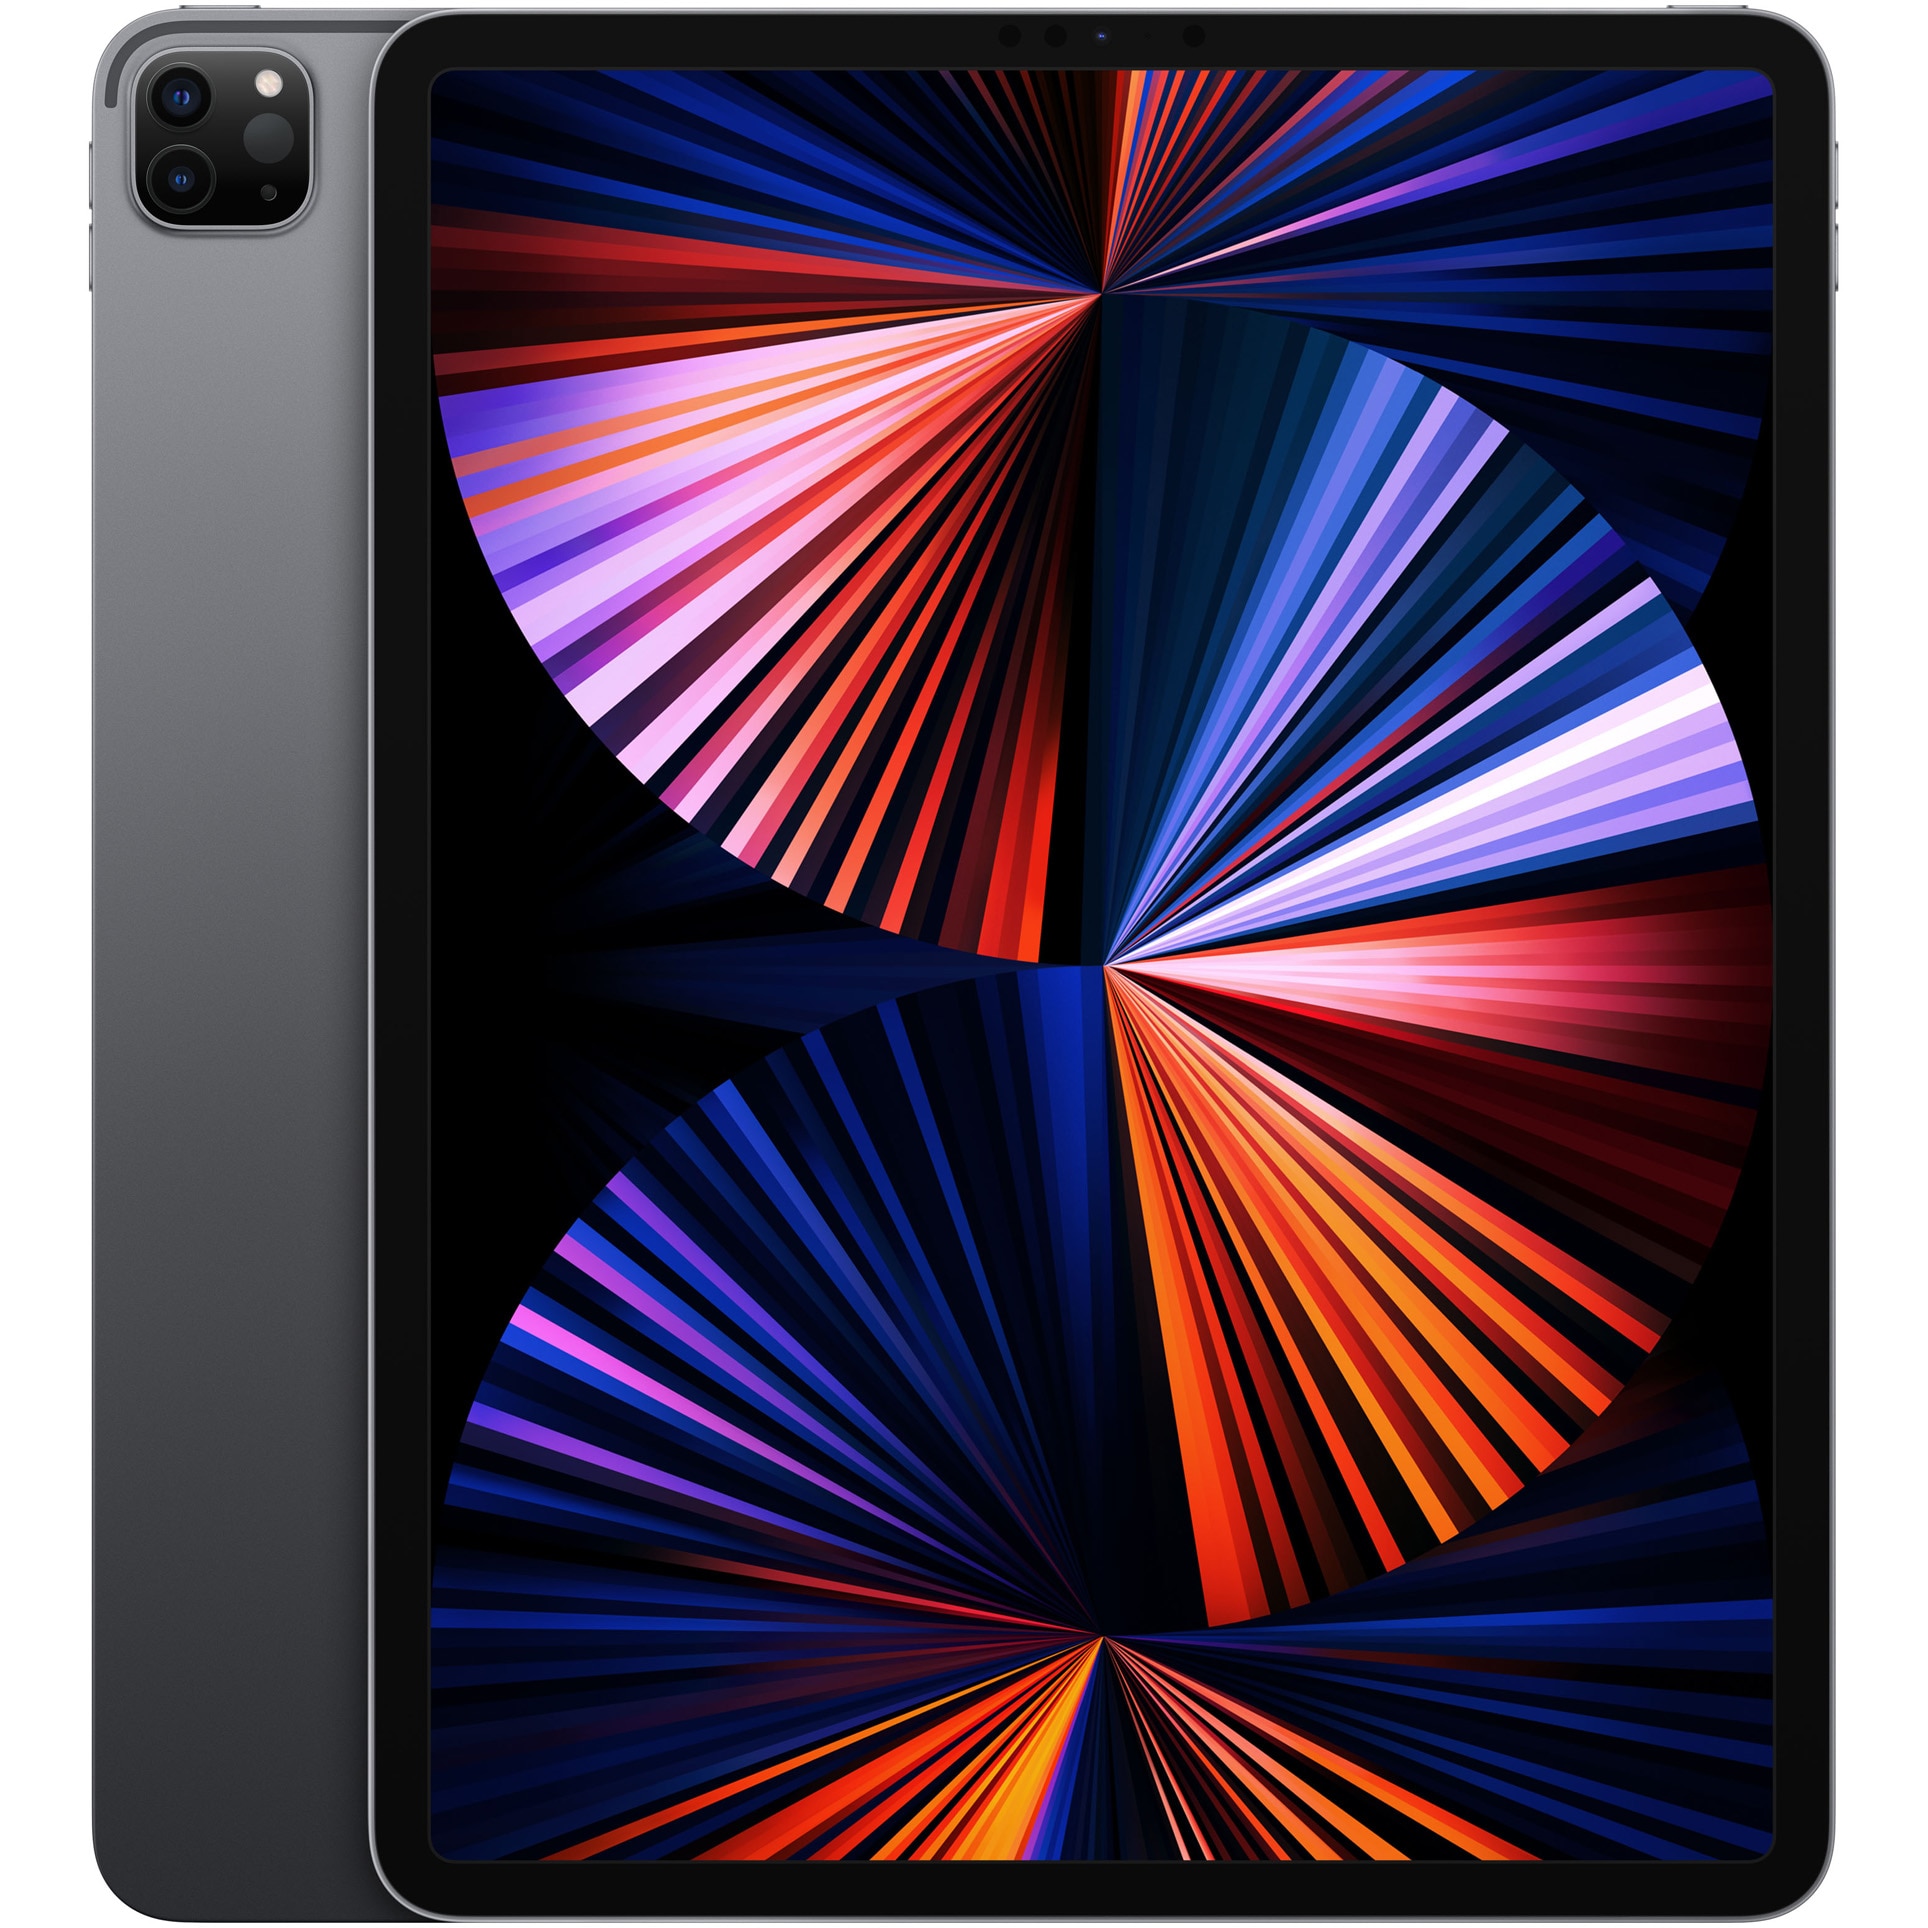 Rejoice Extraction come Apple iPad Pro 12.9" (2021), 2TB, Wi‑Fi, Space Grey - eMAG.ro